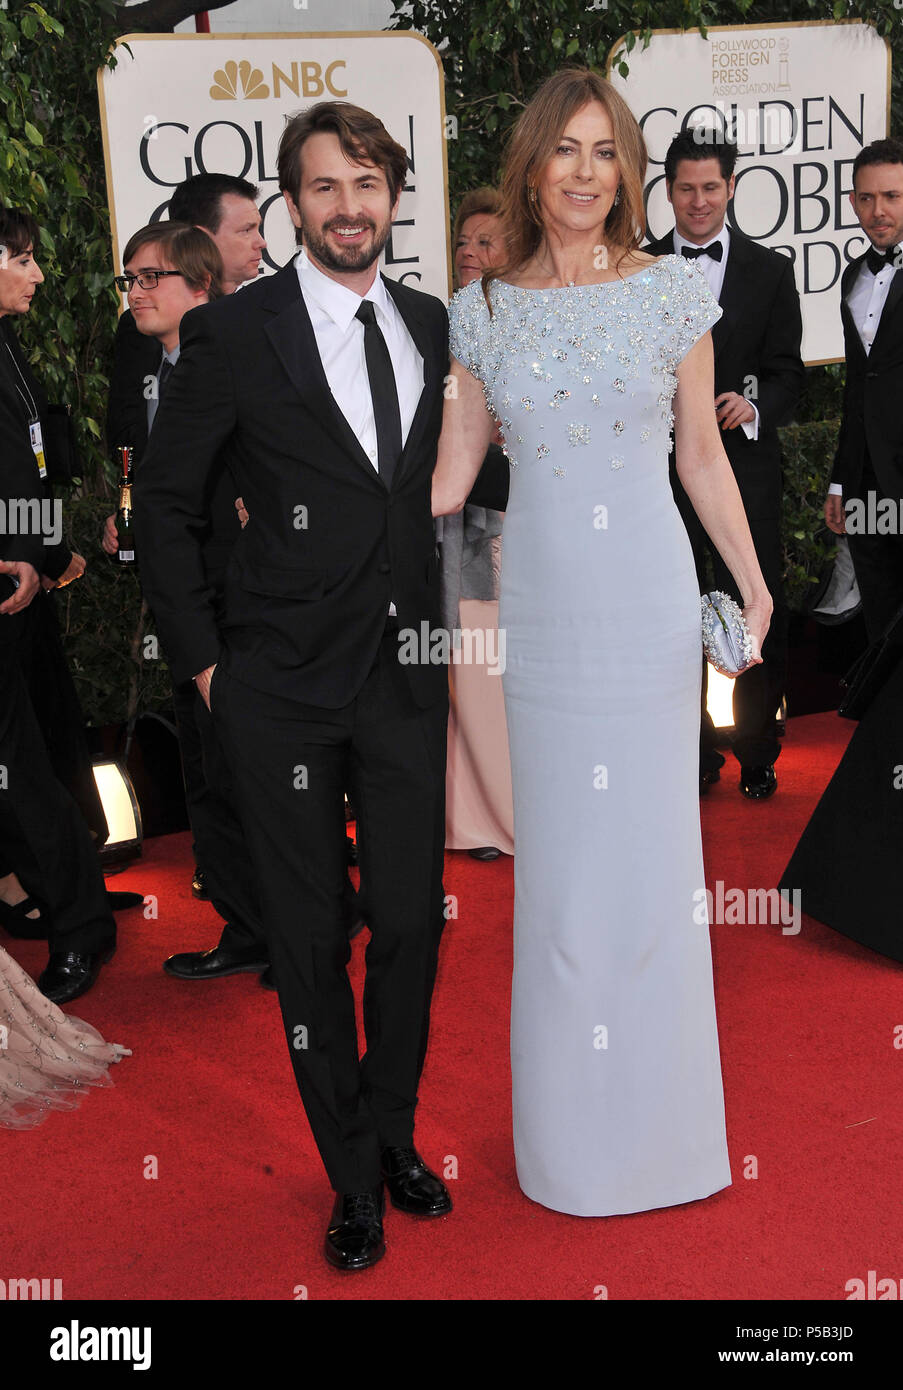 Kathryn Bigelow and Mark Boal  arriving at the 70th Golden Globes Awards 2013 at the  Hilton Hotel In Beverly Hills.Kathryn Bigelow and Mark Boal  ------------- Red Carpet Event, Vertical, USA, Film Industry, Celebrities,  Photography, Bestof, Arts Culture and Entertainment, Topix Celebrities fashion /  Vertical, Best of, Event in Hollywood Life - California,  Red Carpet and backstage, USA, Film Industry, Celebrities,  movie celebrities, TV celebrities, Music celebrities, Photography, Bestof, Arts Culture and Entertainment,  Topix, vertical,  family from from the year , 2013, inquiry tsuni@Gam Stock Photo